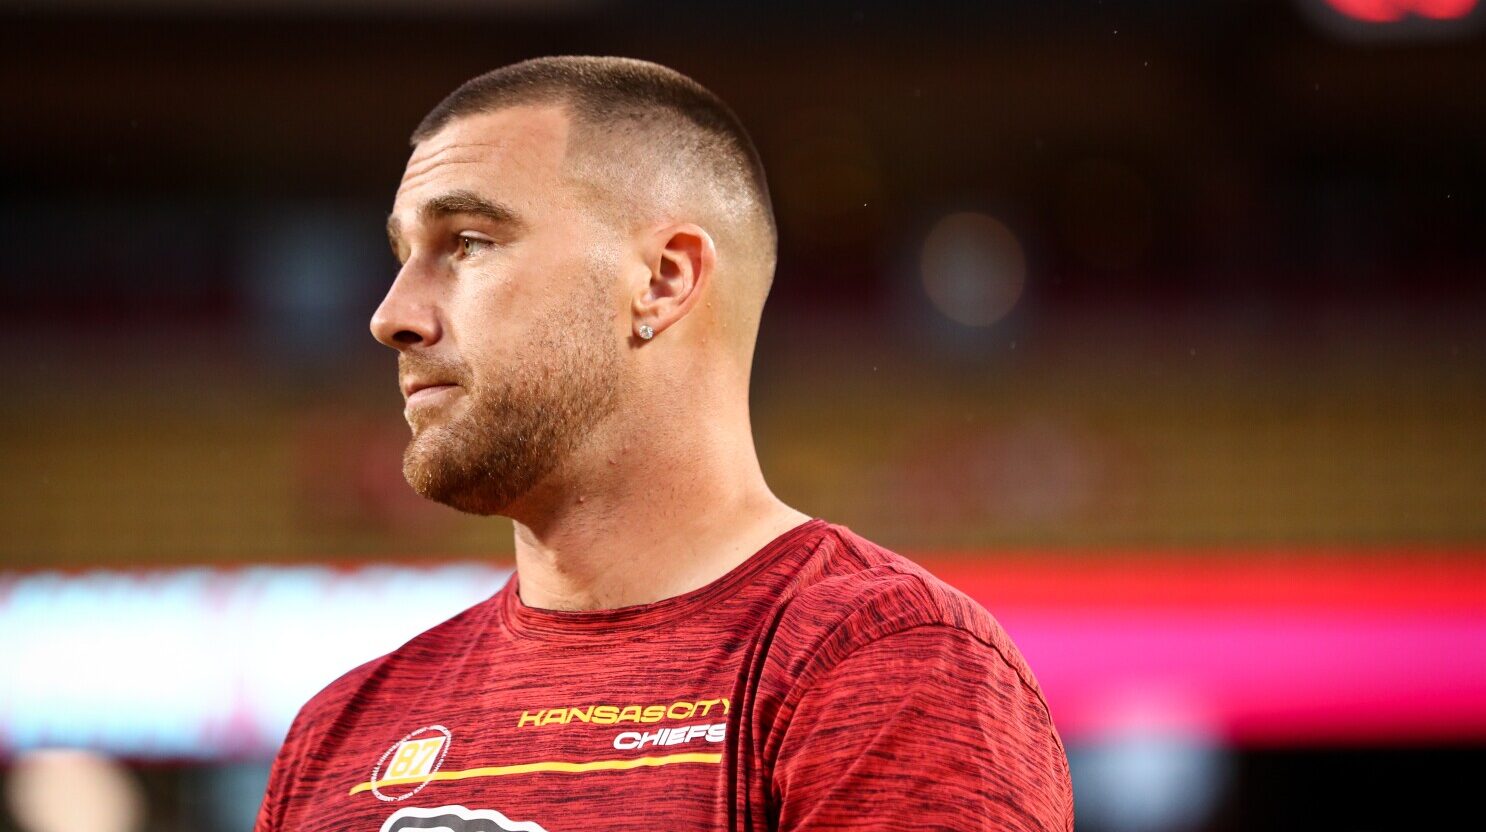 Chiefs optimistic that TE Travis Kelce will be back from knee